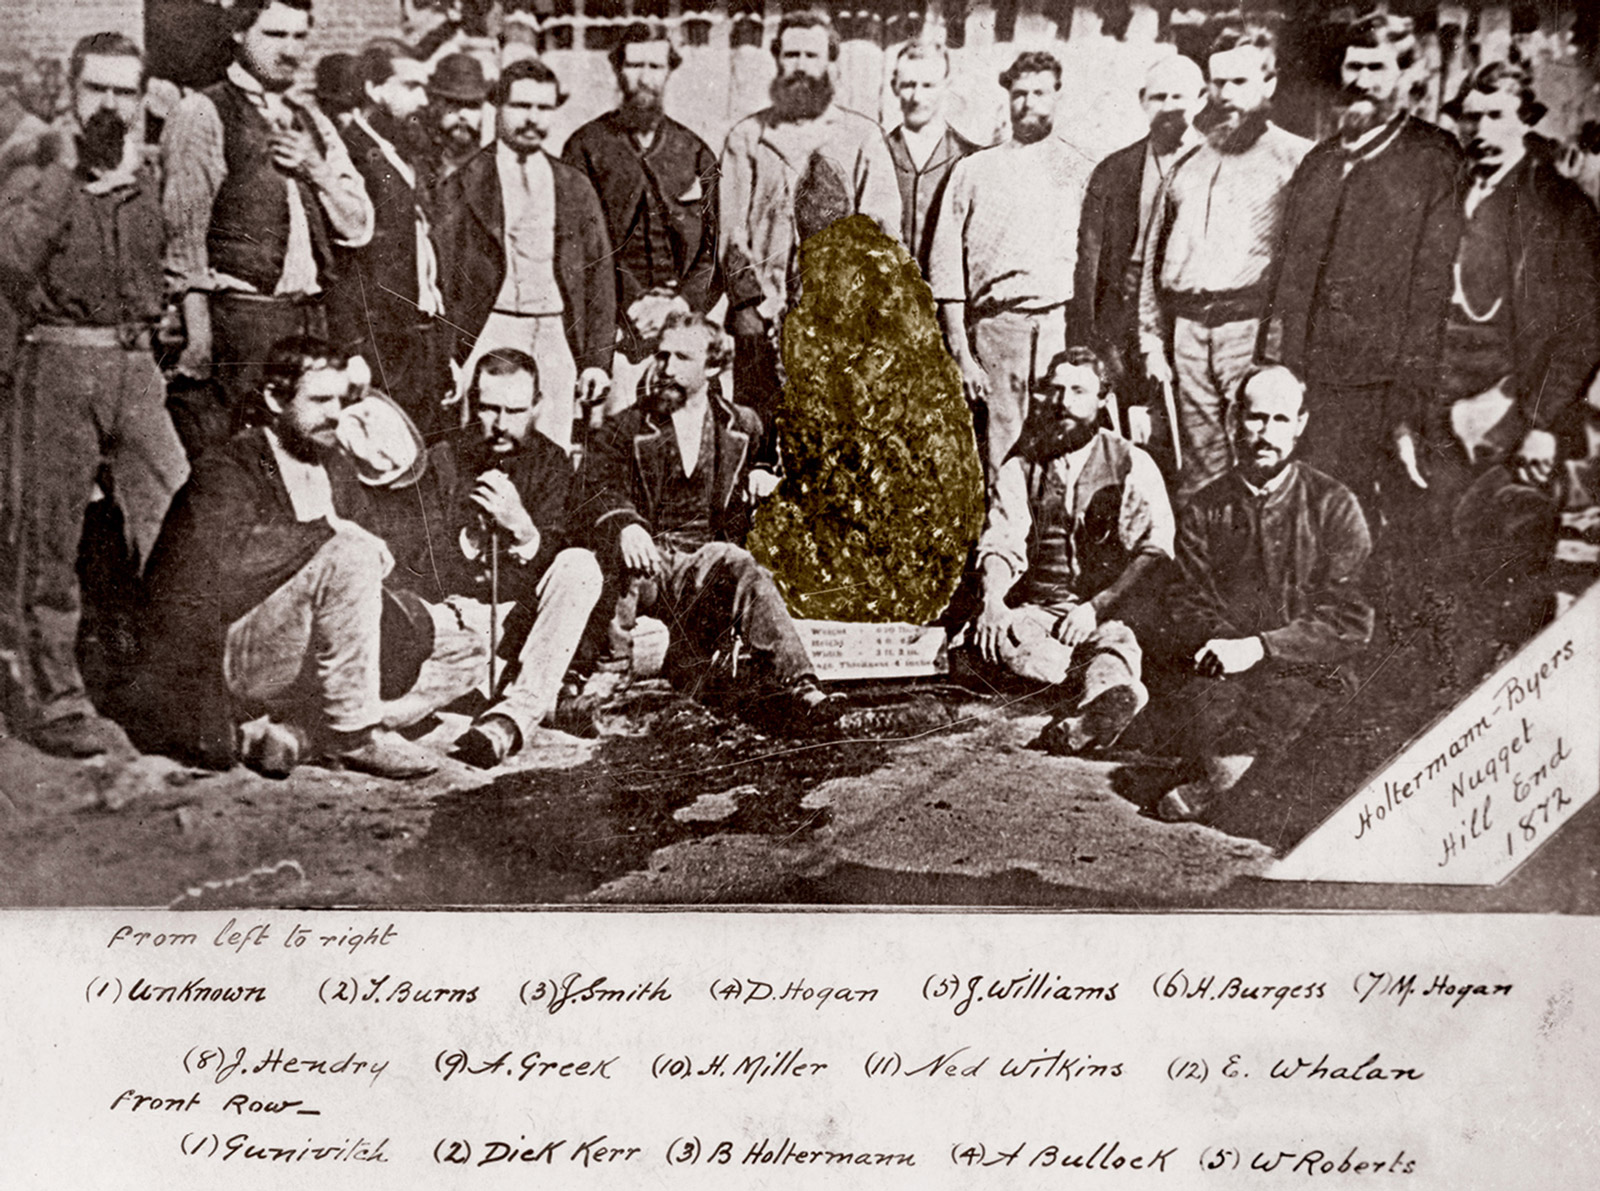 A photograph of Holtermann and his colleagues posing with their discovery. The caption refers to the “Holtermann-Byers Nugget.”